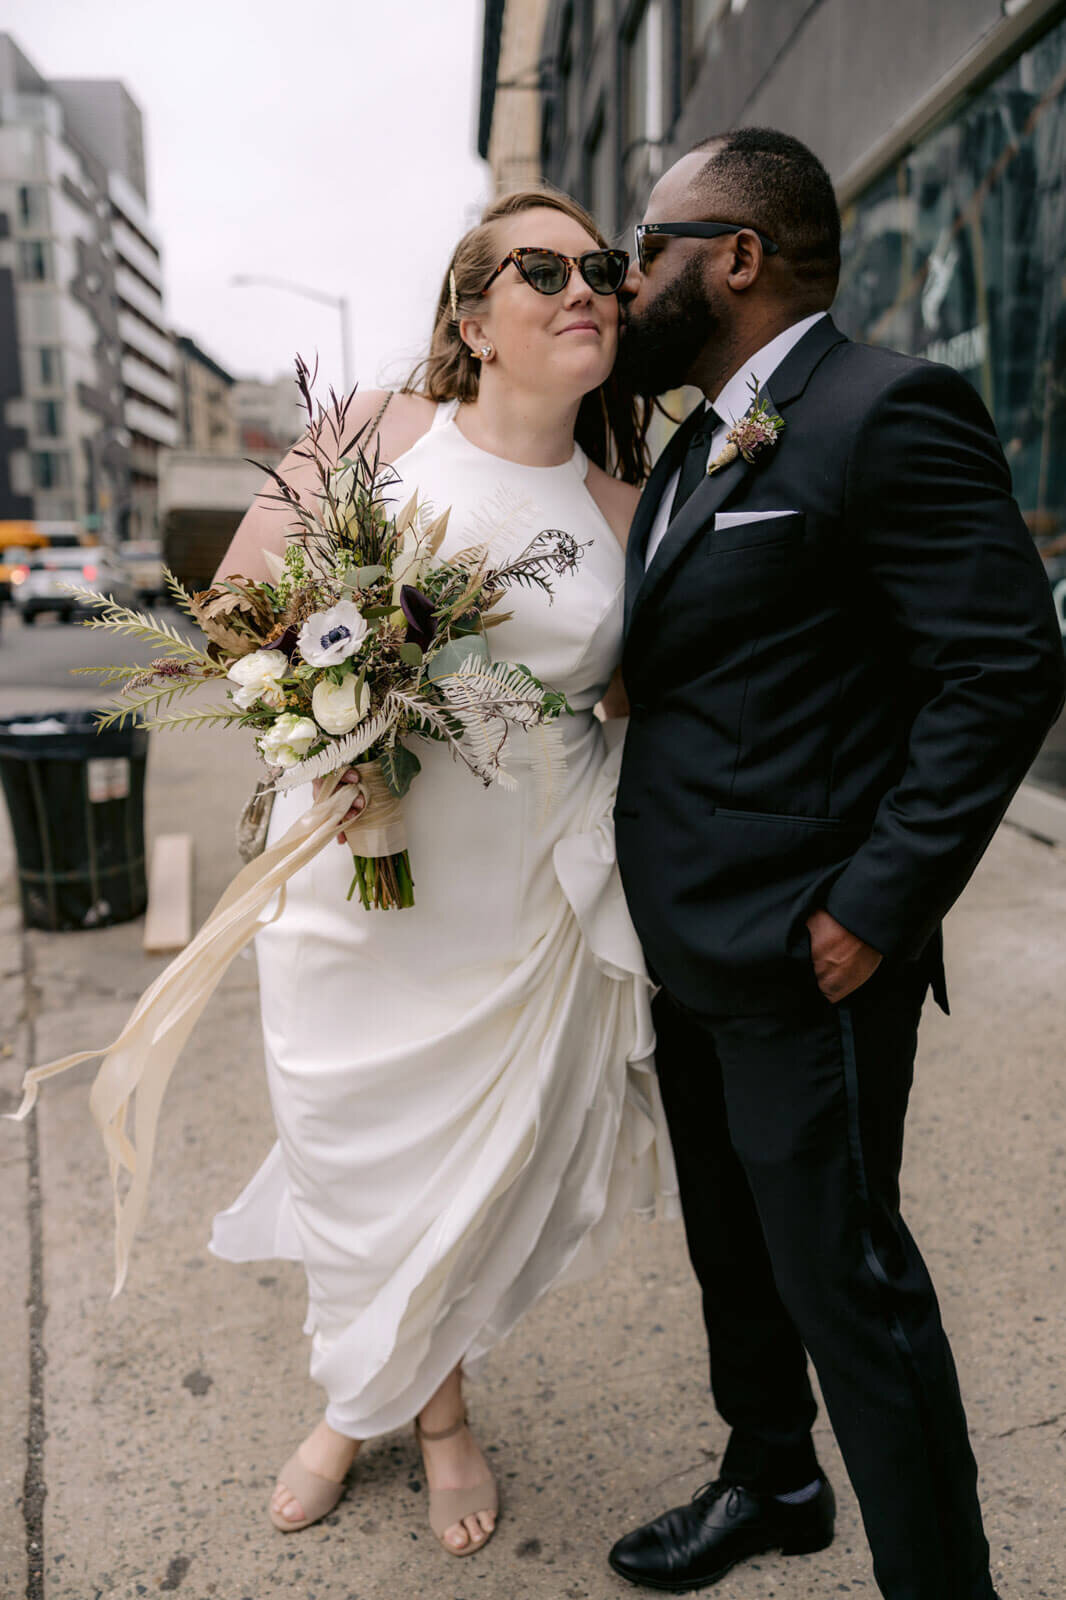 The groom is kissing the bride in the cheeks in the streets of New York City.